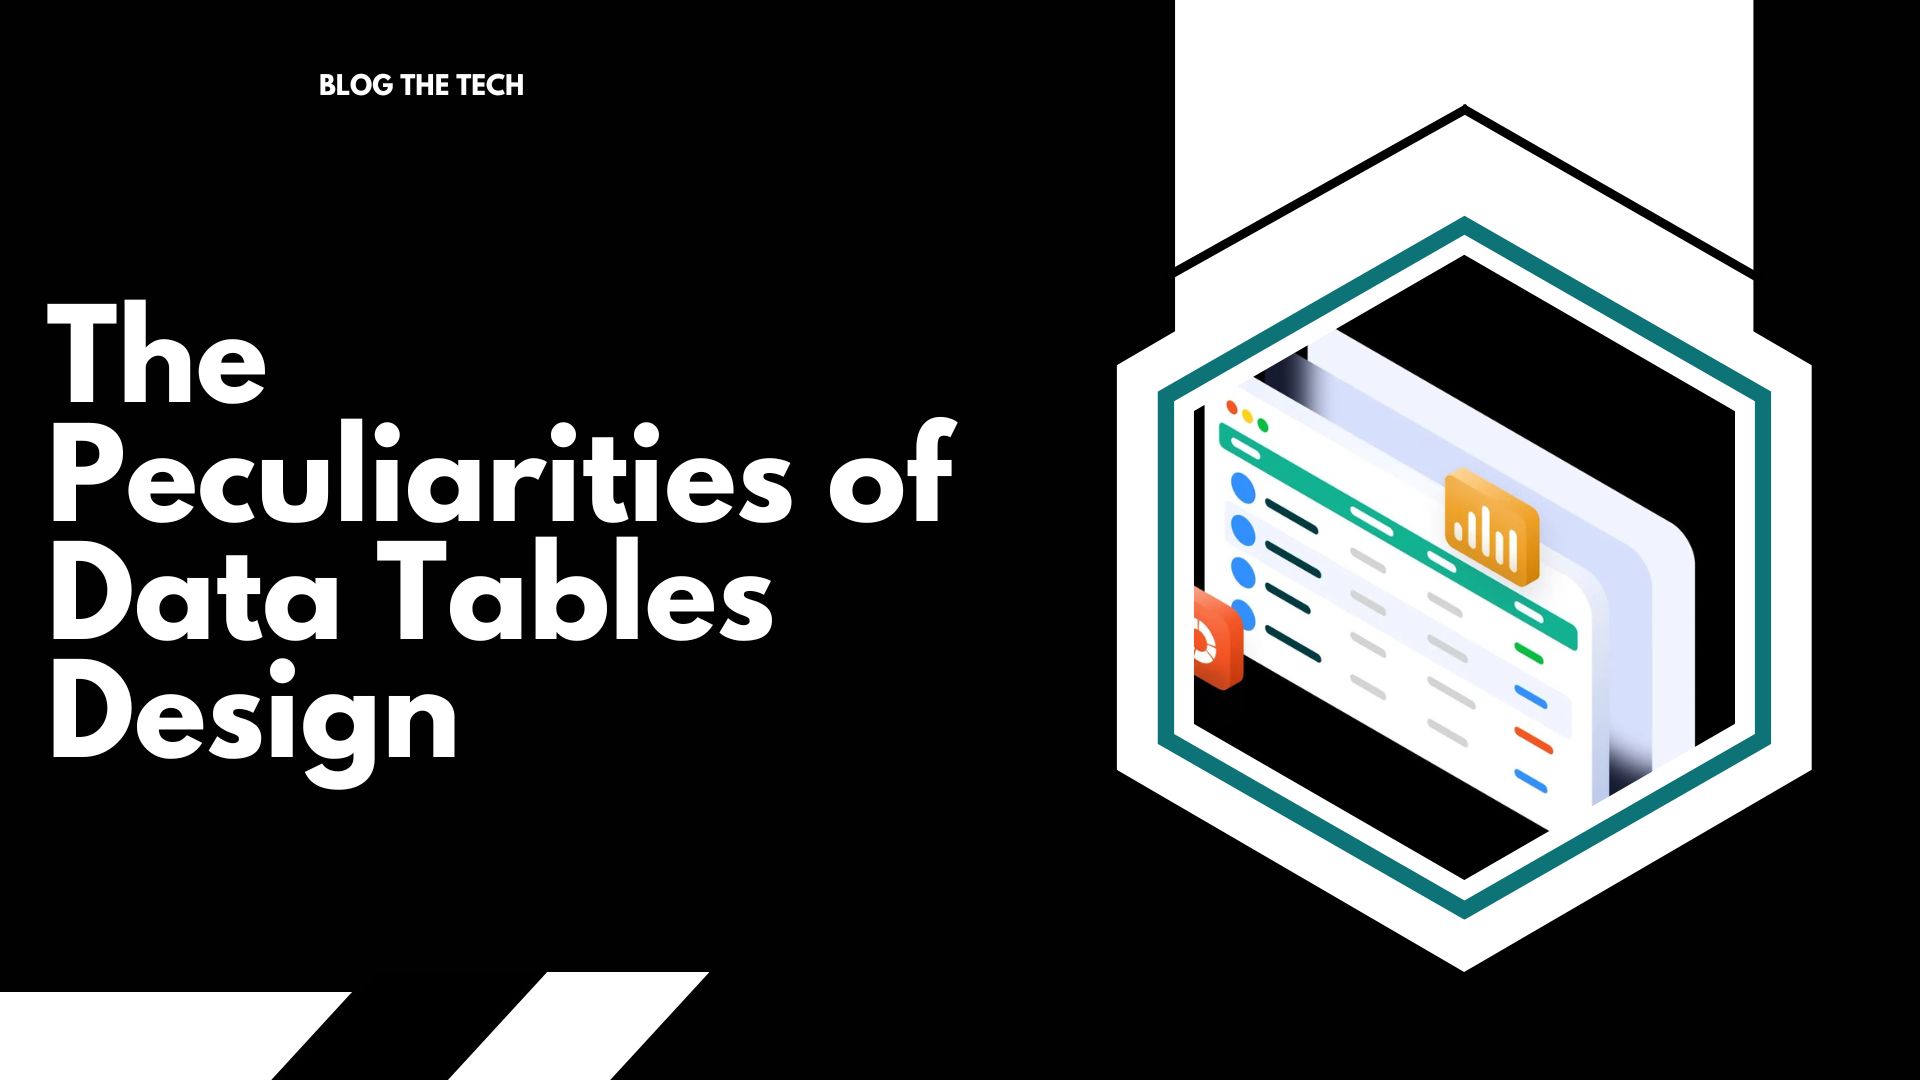 The Peculiarities of Data Tables Design